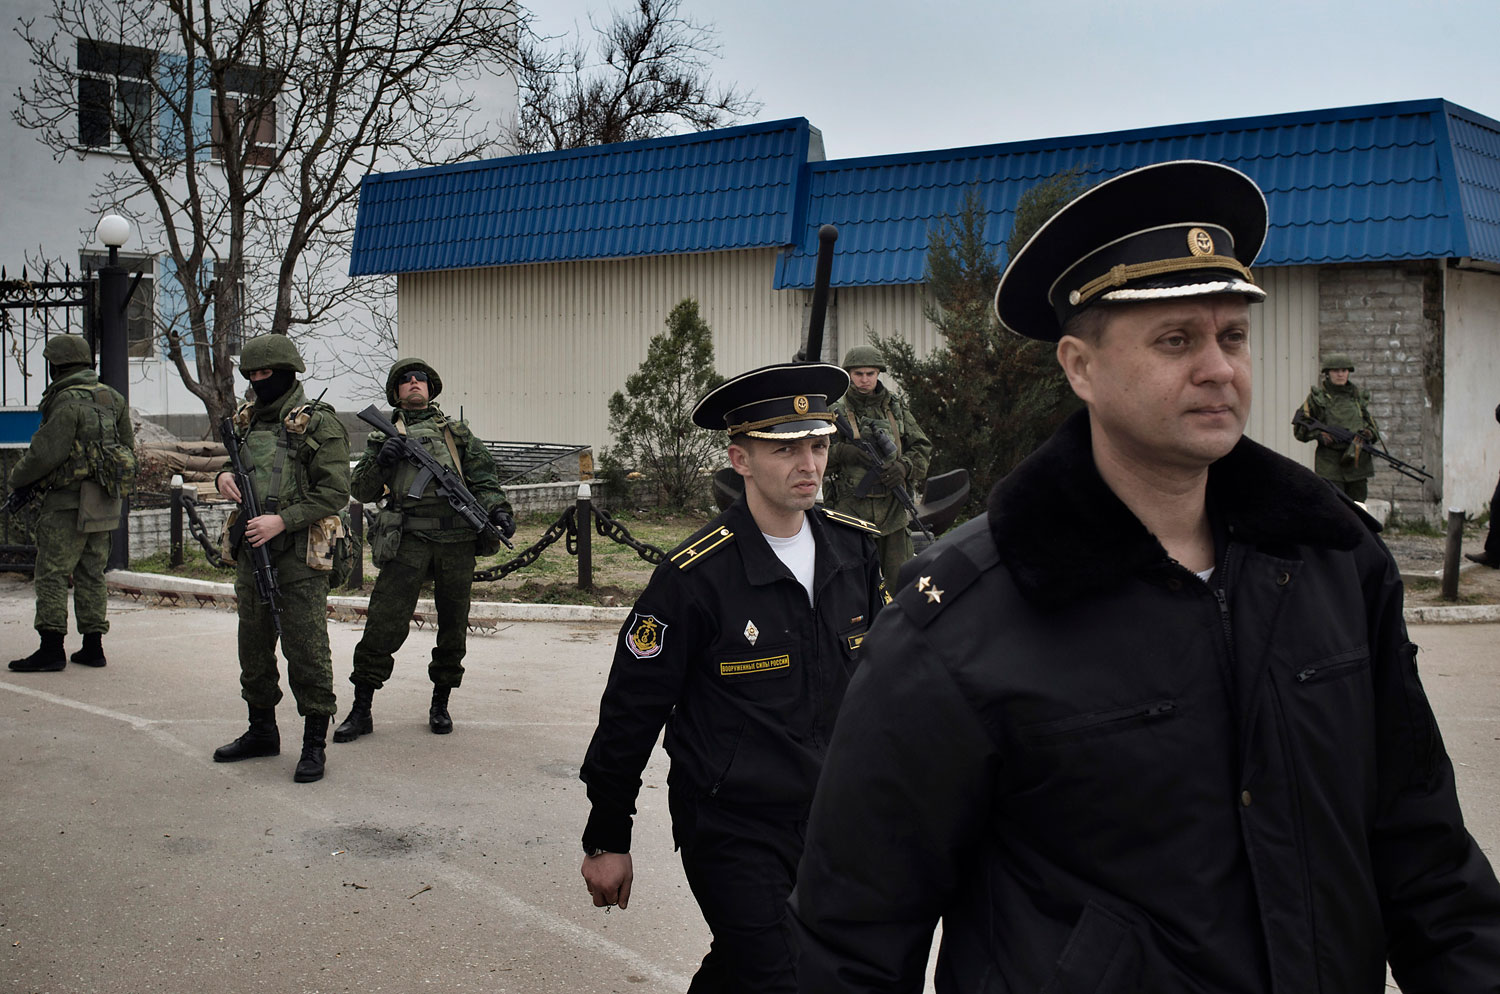 Ukrainian naval officers passed by Russian military personnel as they left the Ukrainian naval headquarters in Sevastopol on Wednesday after Russian forces and local militiamen seized control of the facility, March 19, 2014. (Yuri Kozyrev—NOOR for TIME)